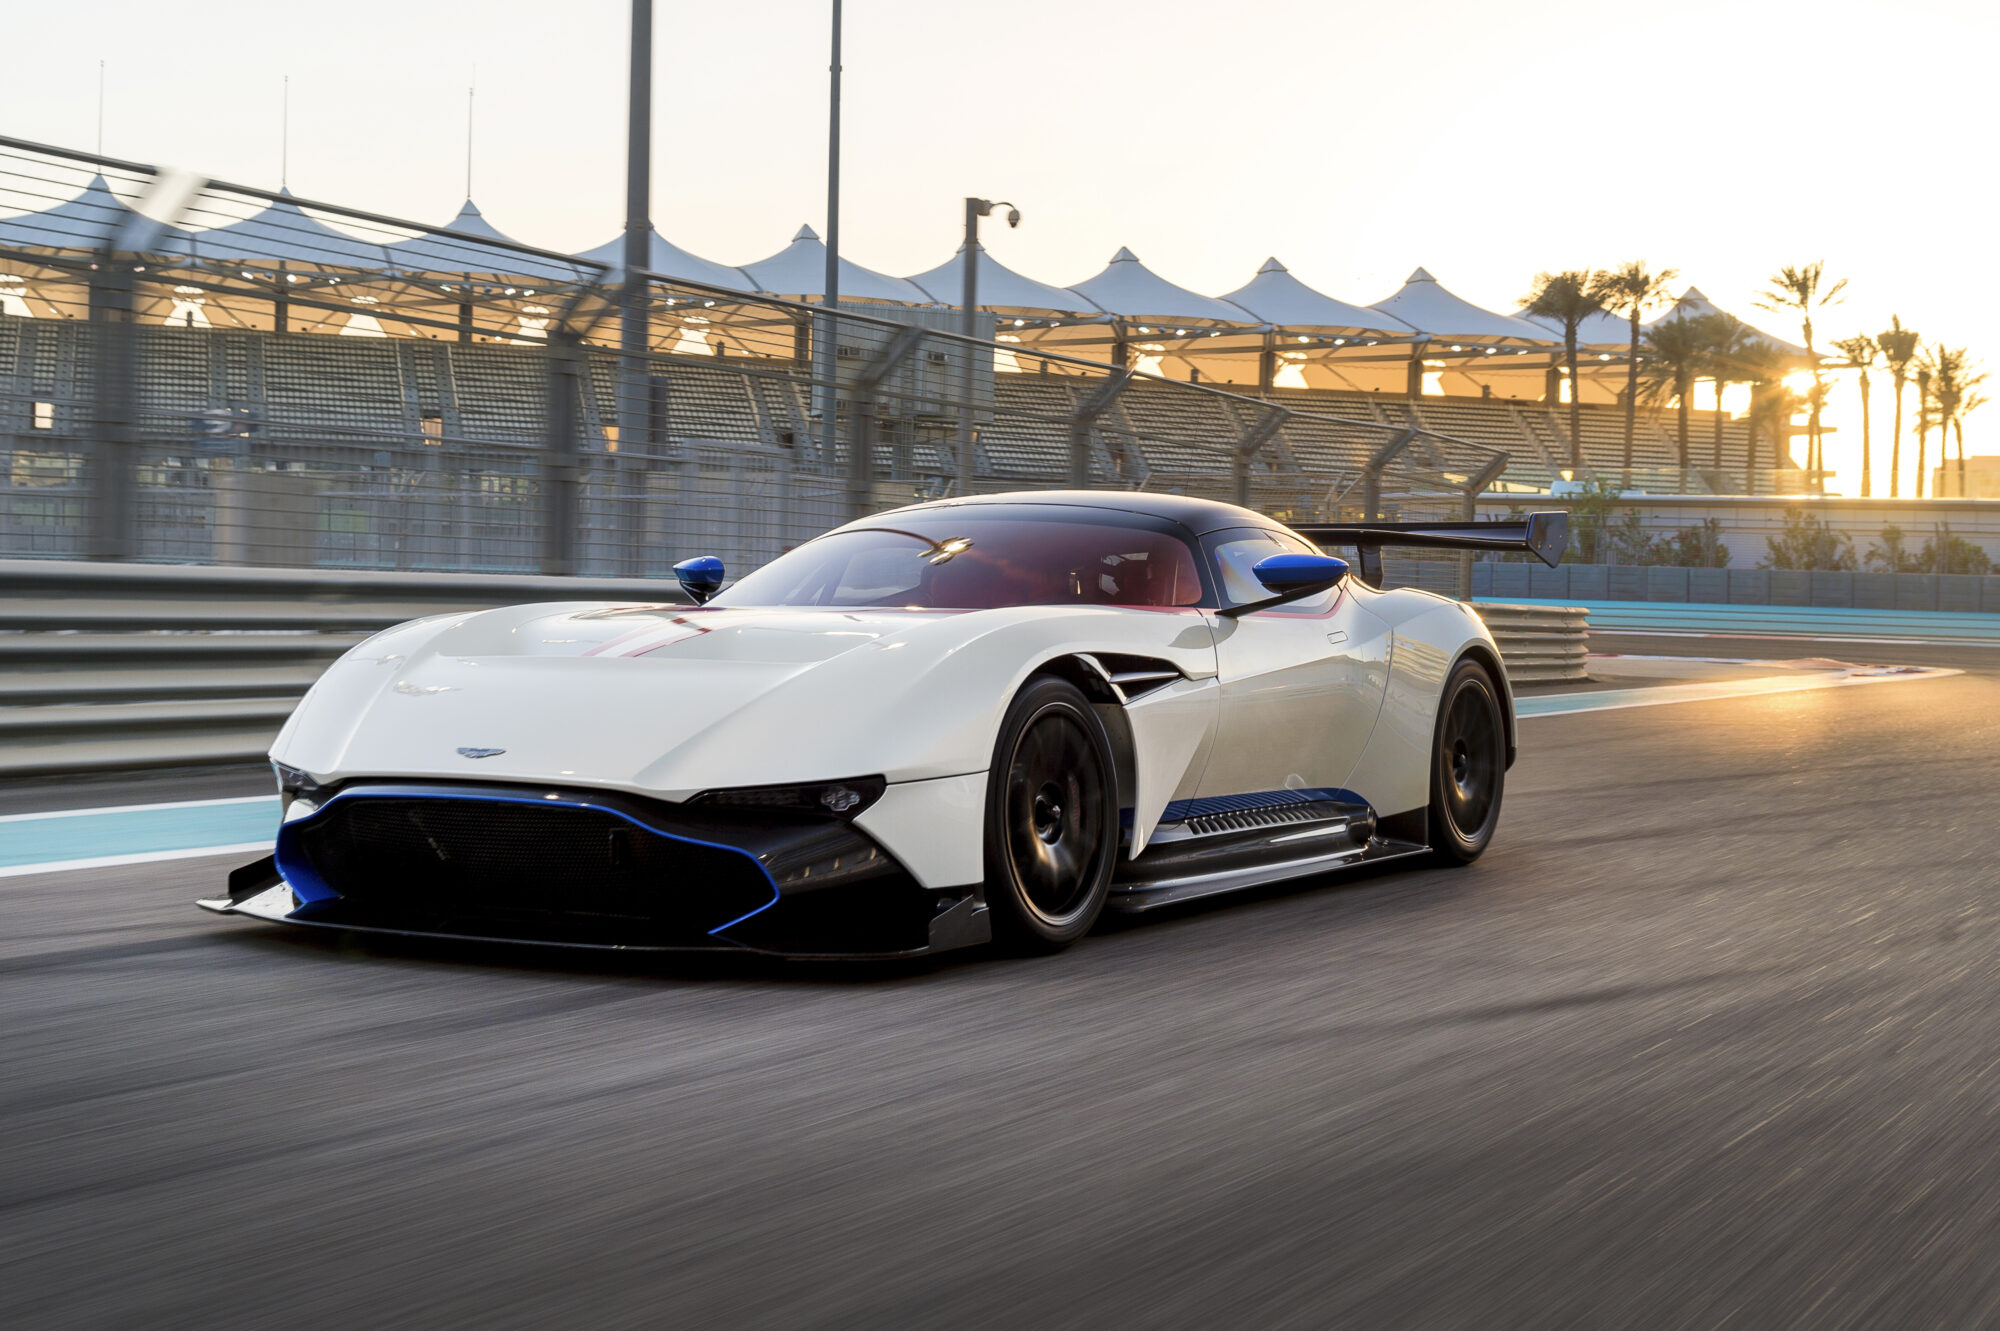 I'd Love to Have the First Win for Aston Martin!